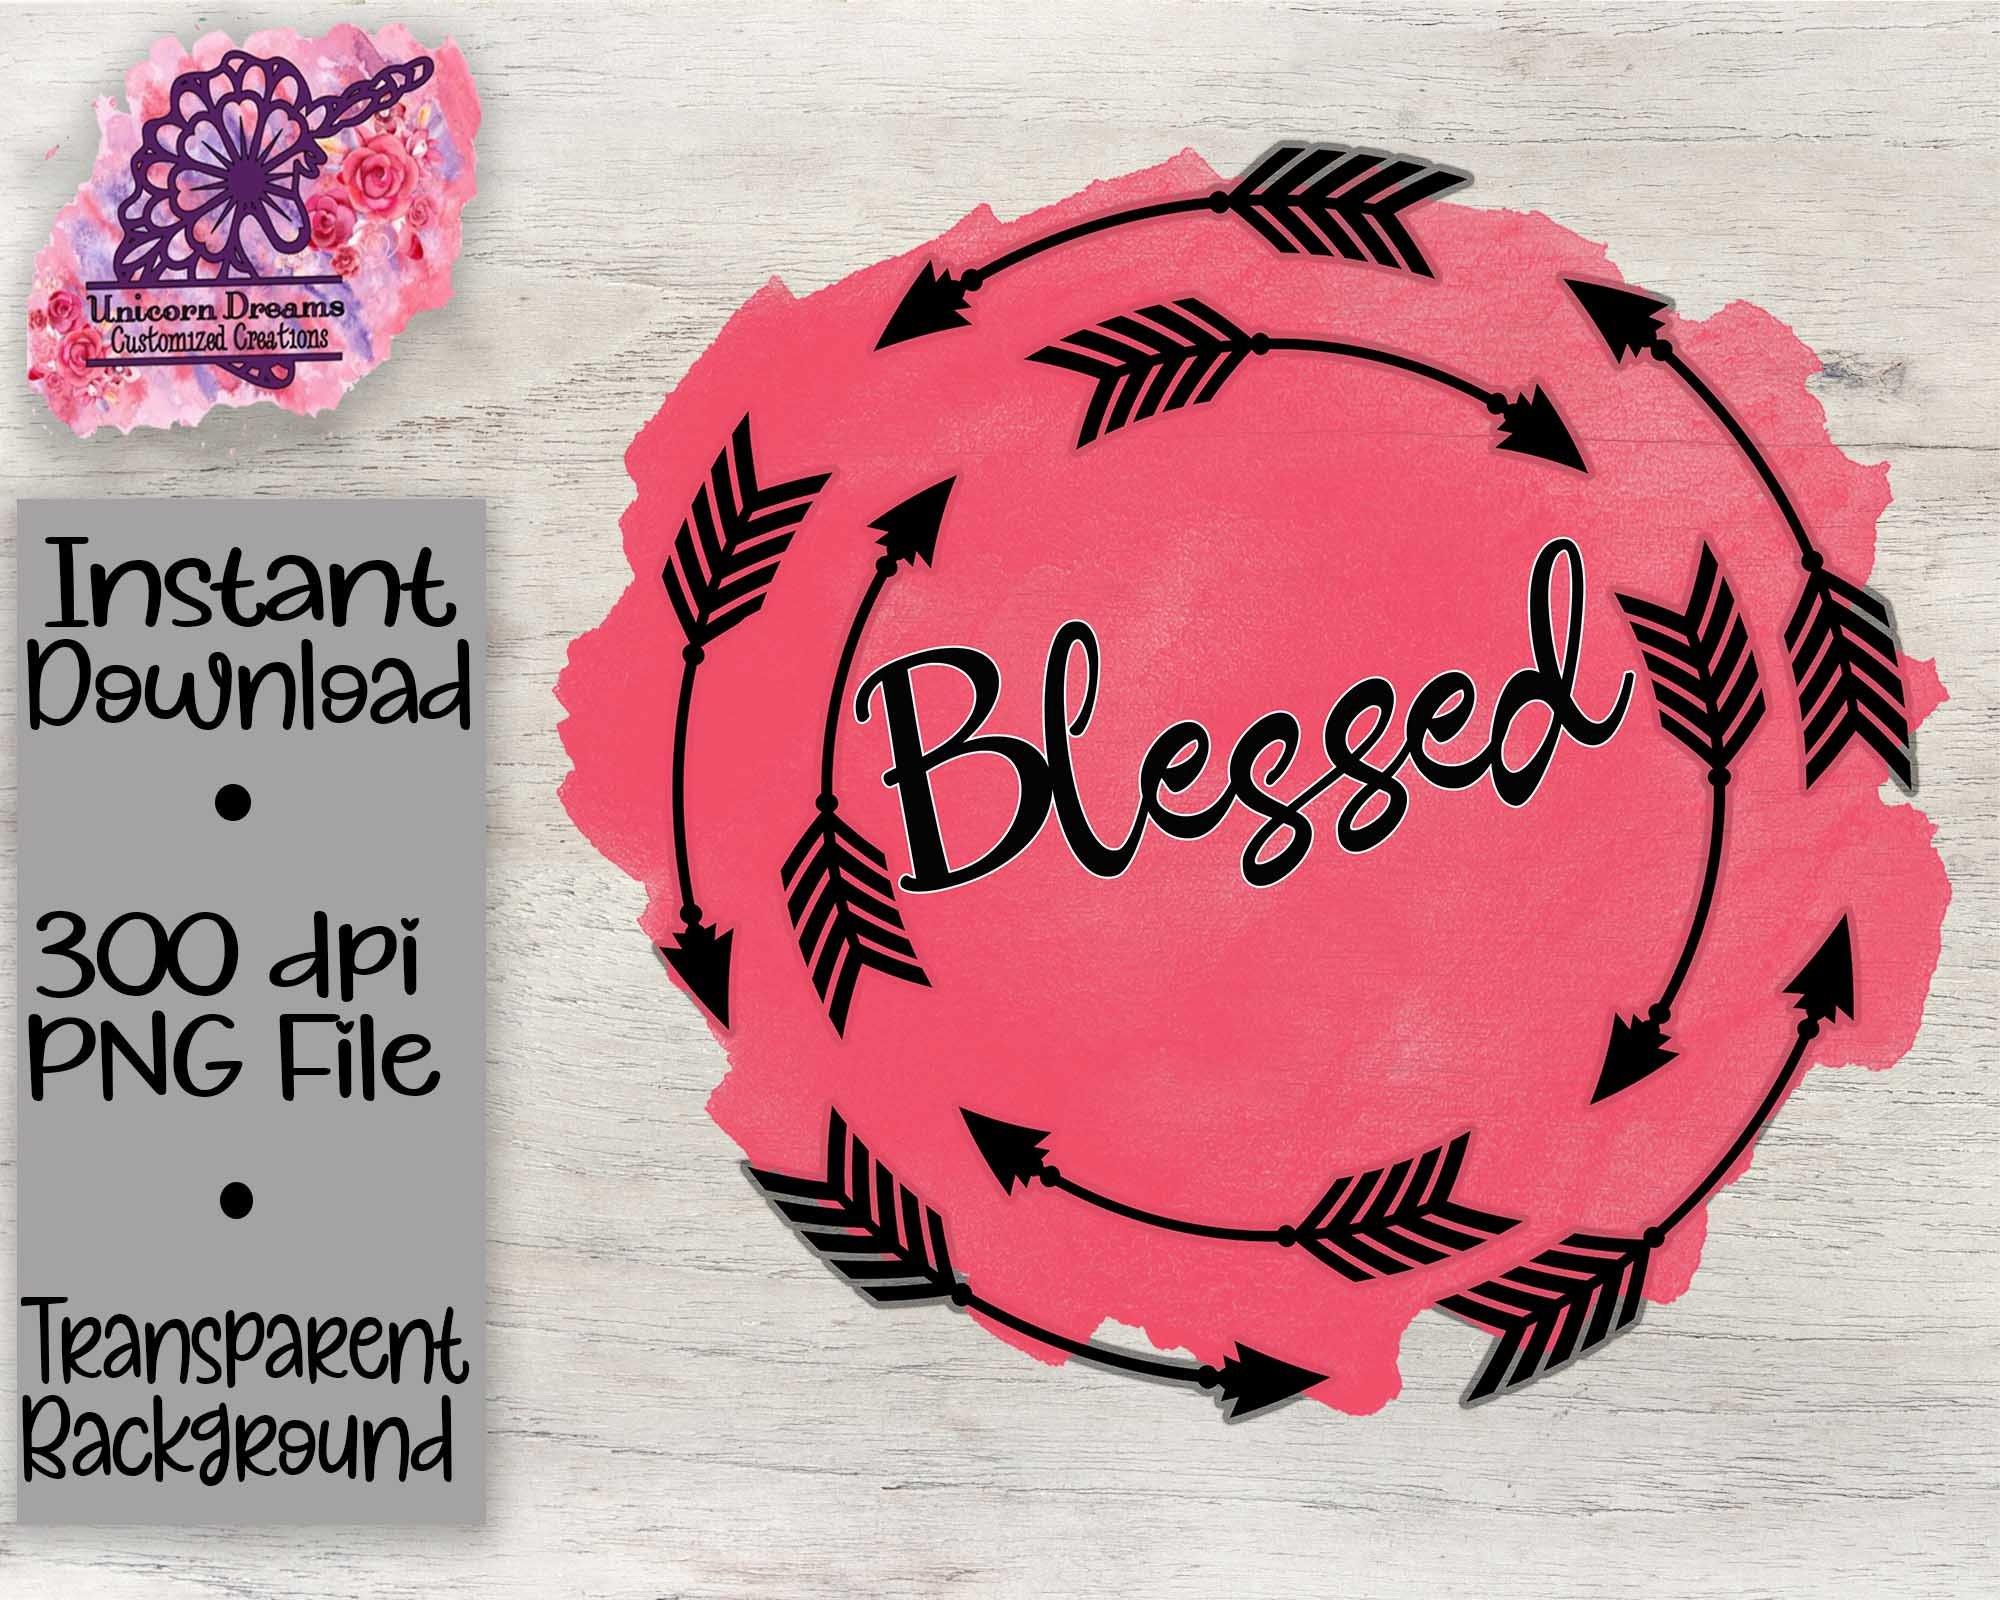 Blessed Watercolor with Arrow Wreath PNG Digital Download - Unicorn Dreams Customized Creations